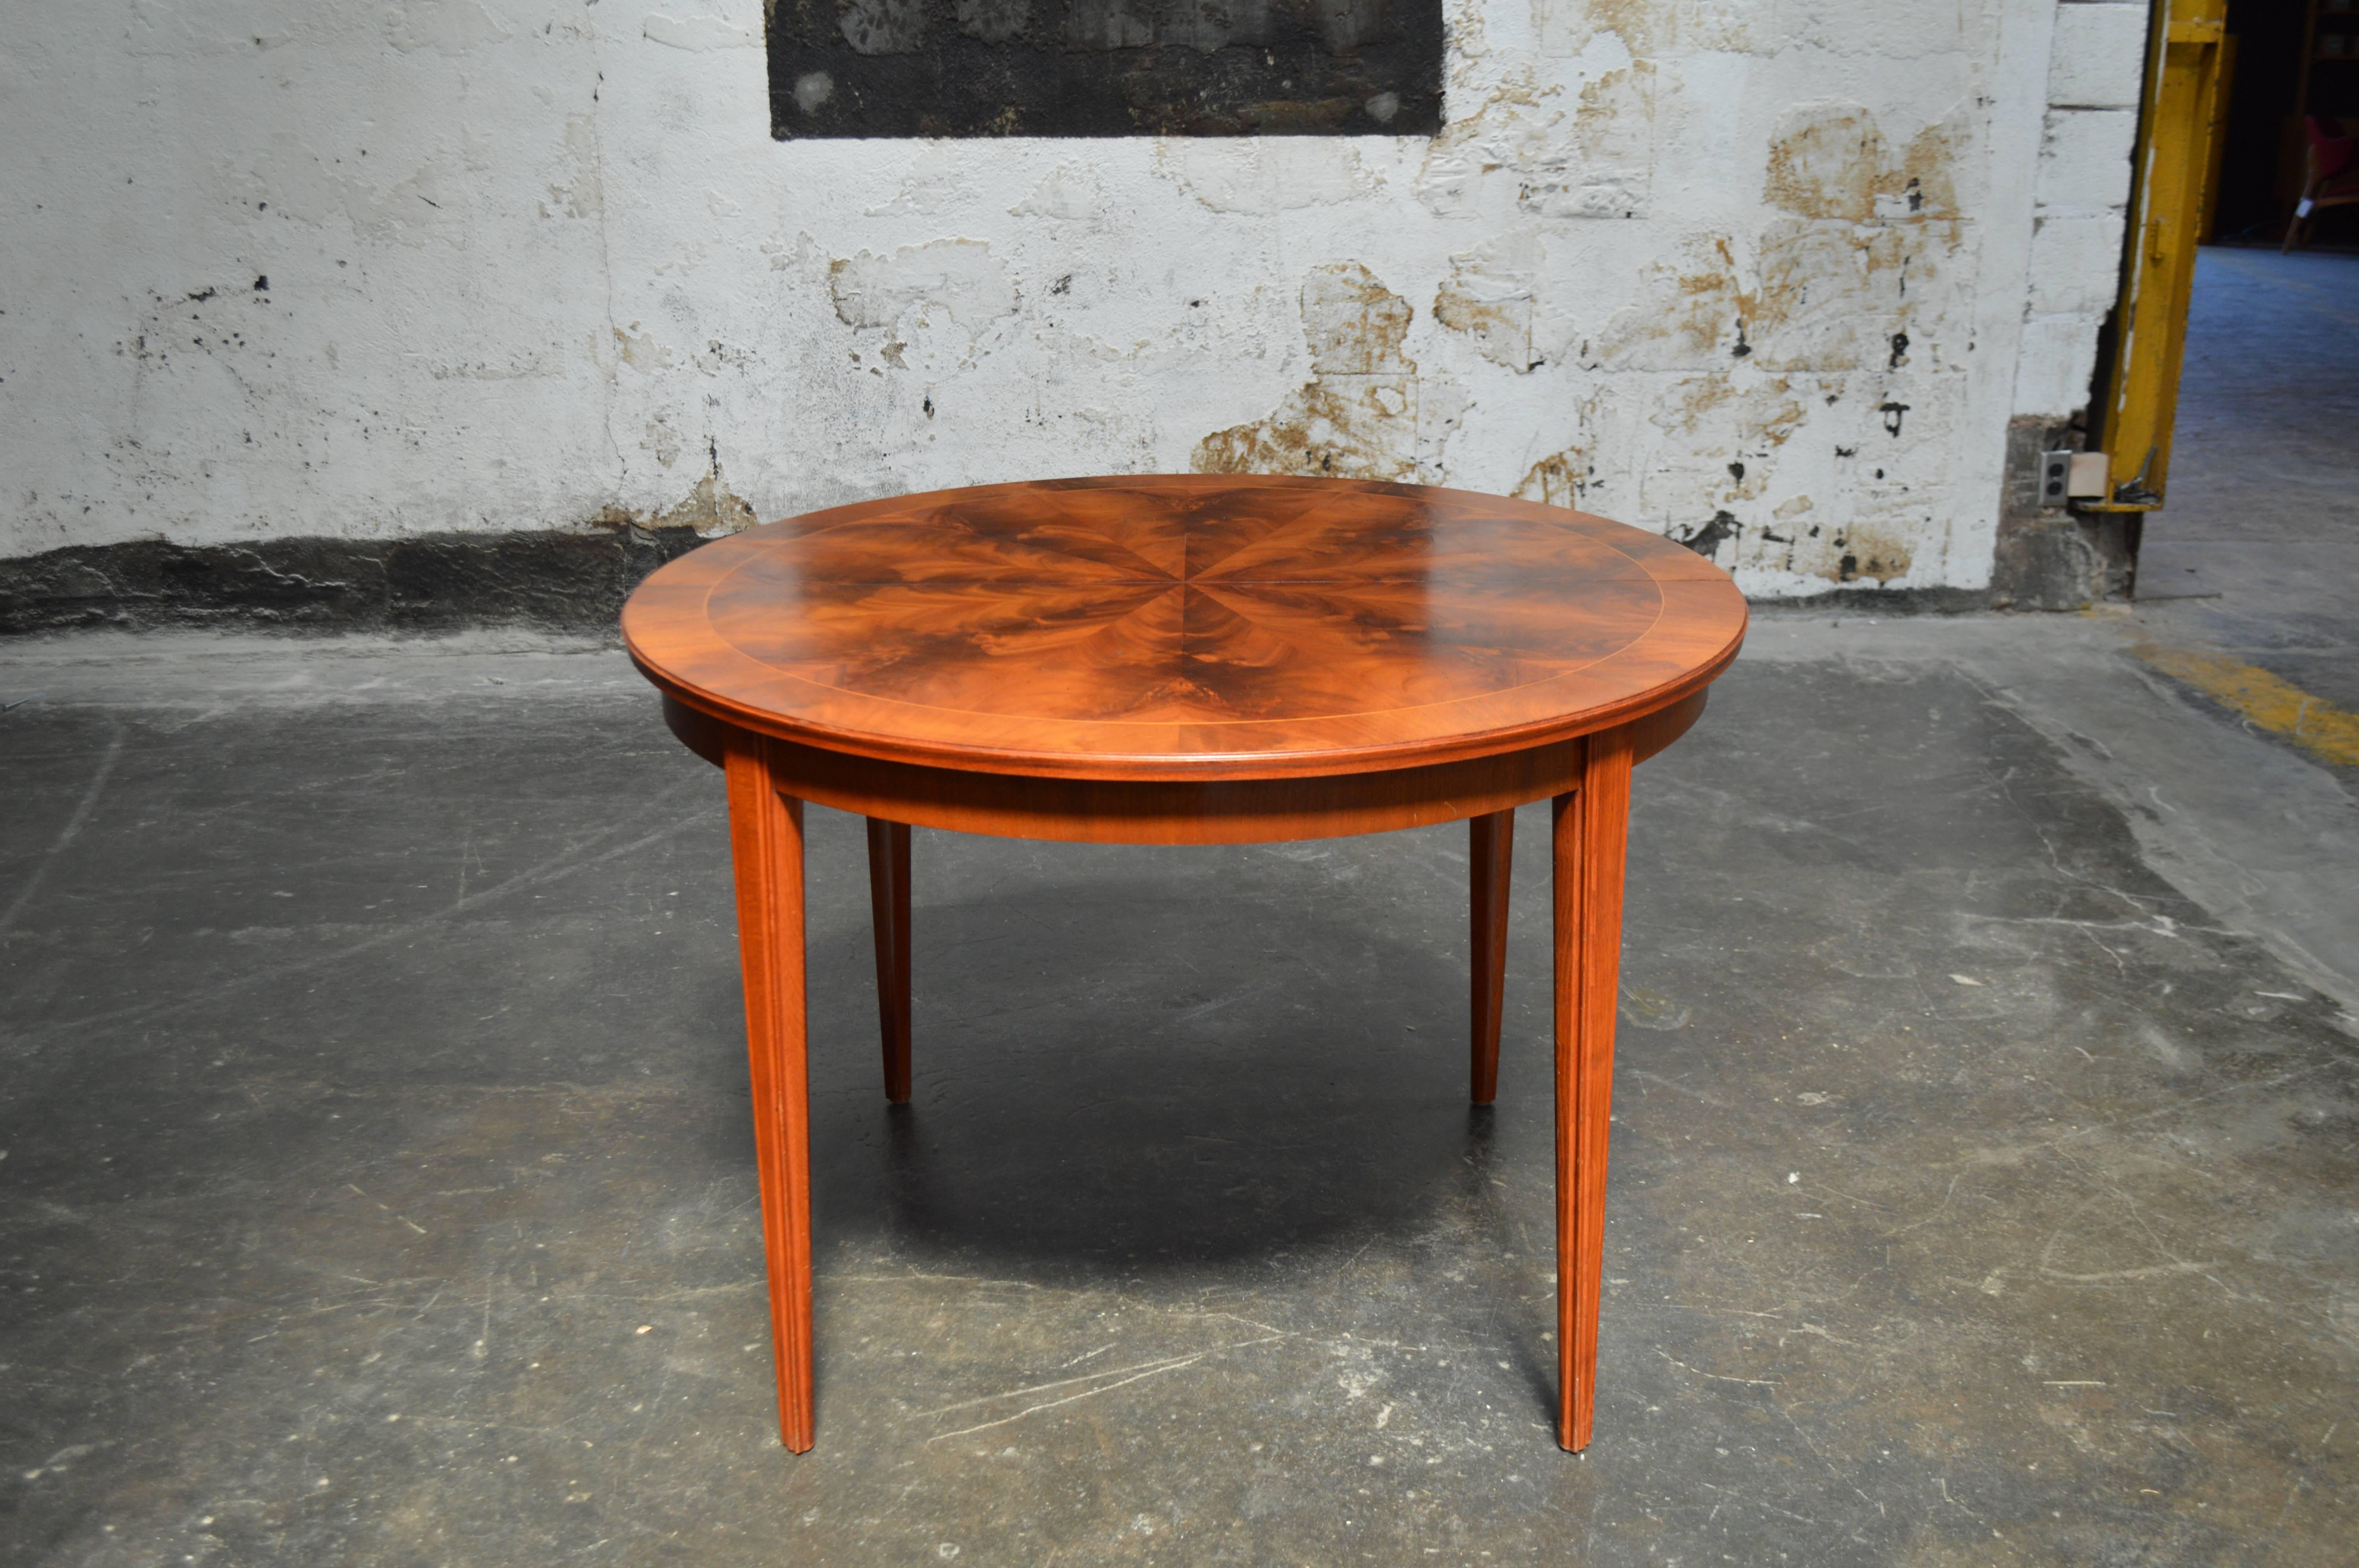 Handsome round mahogany Svenska Mobler dining table with bookmatched top and intarsia trim. Originally made to have a leaf but that piece is long gone so it has been connected on the bottom to keep in place. Sturdy tapered legs finish off this piece